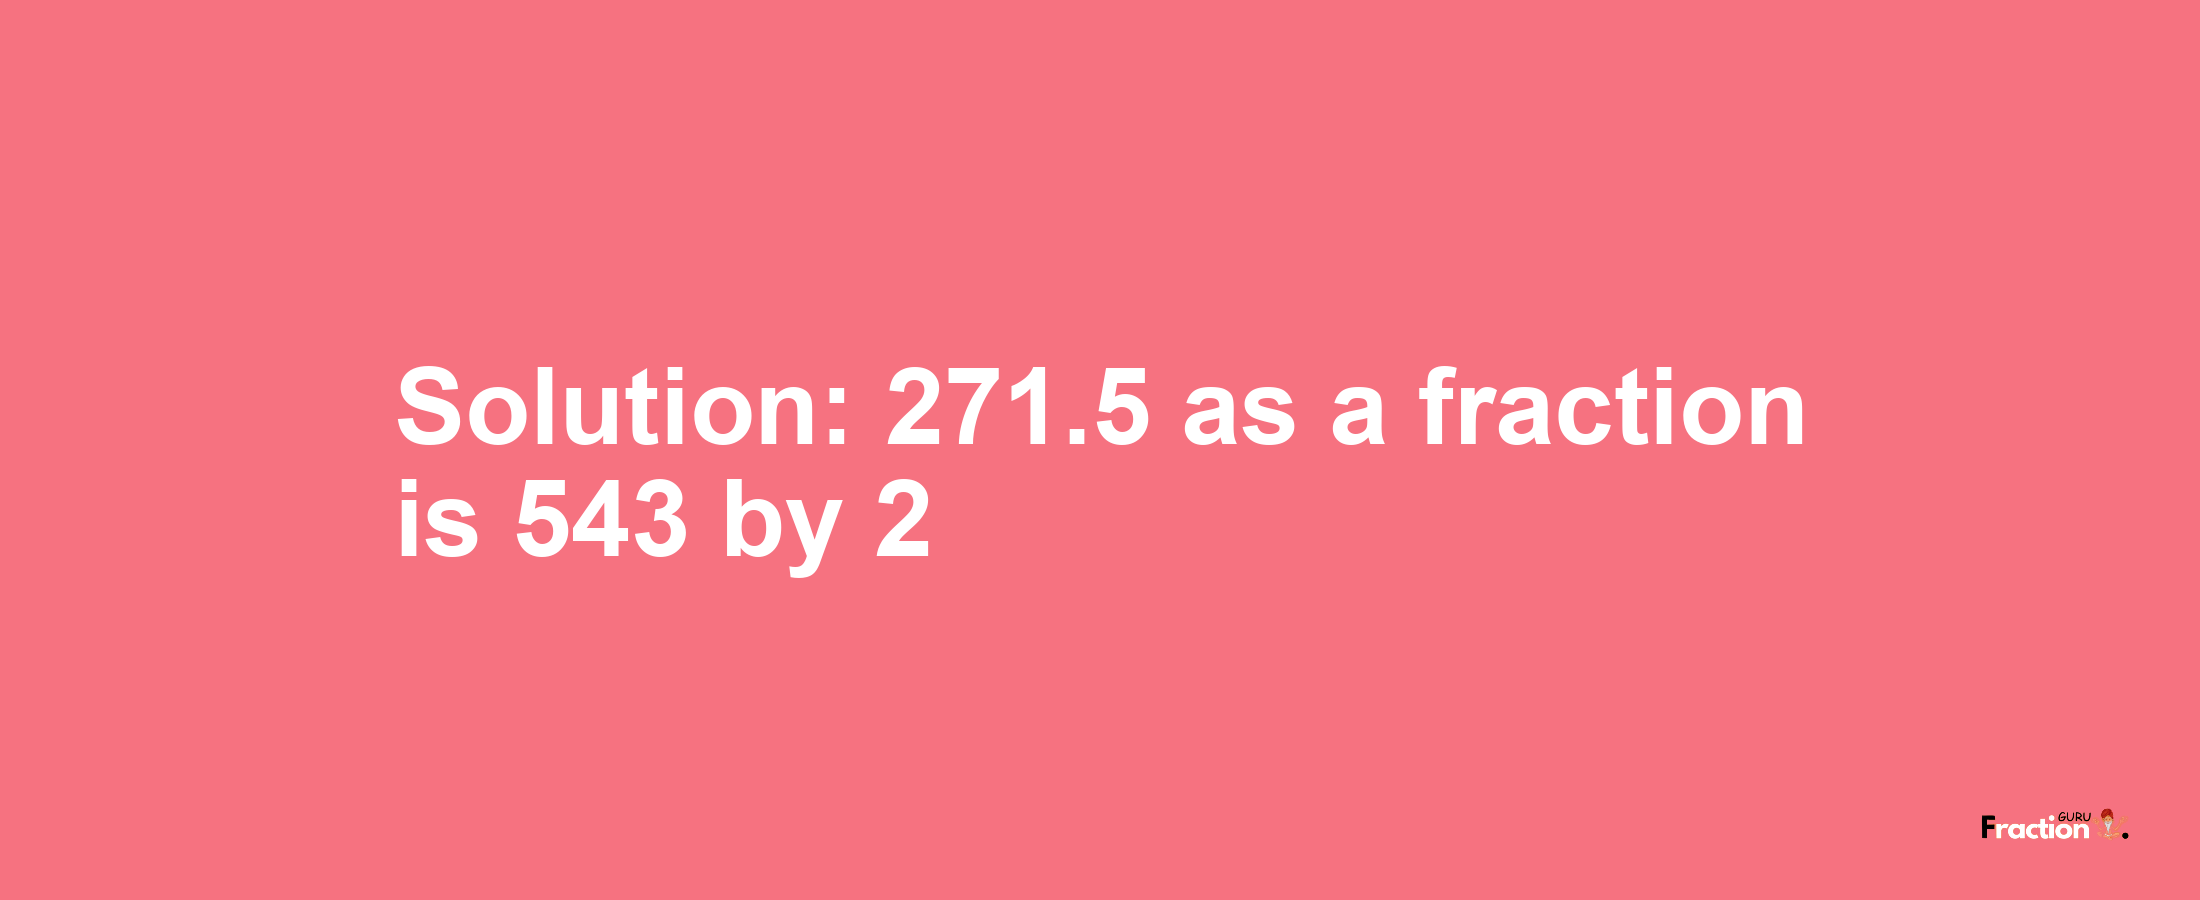 Solution:271.5 as a fraction is 543/2